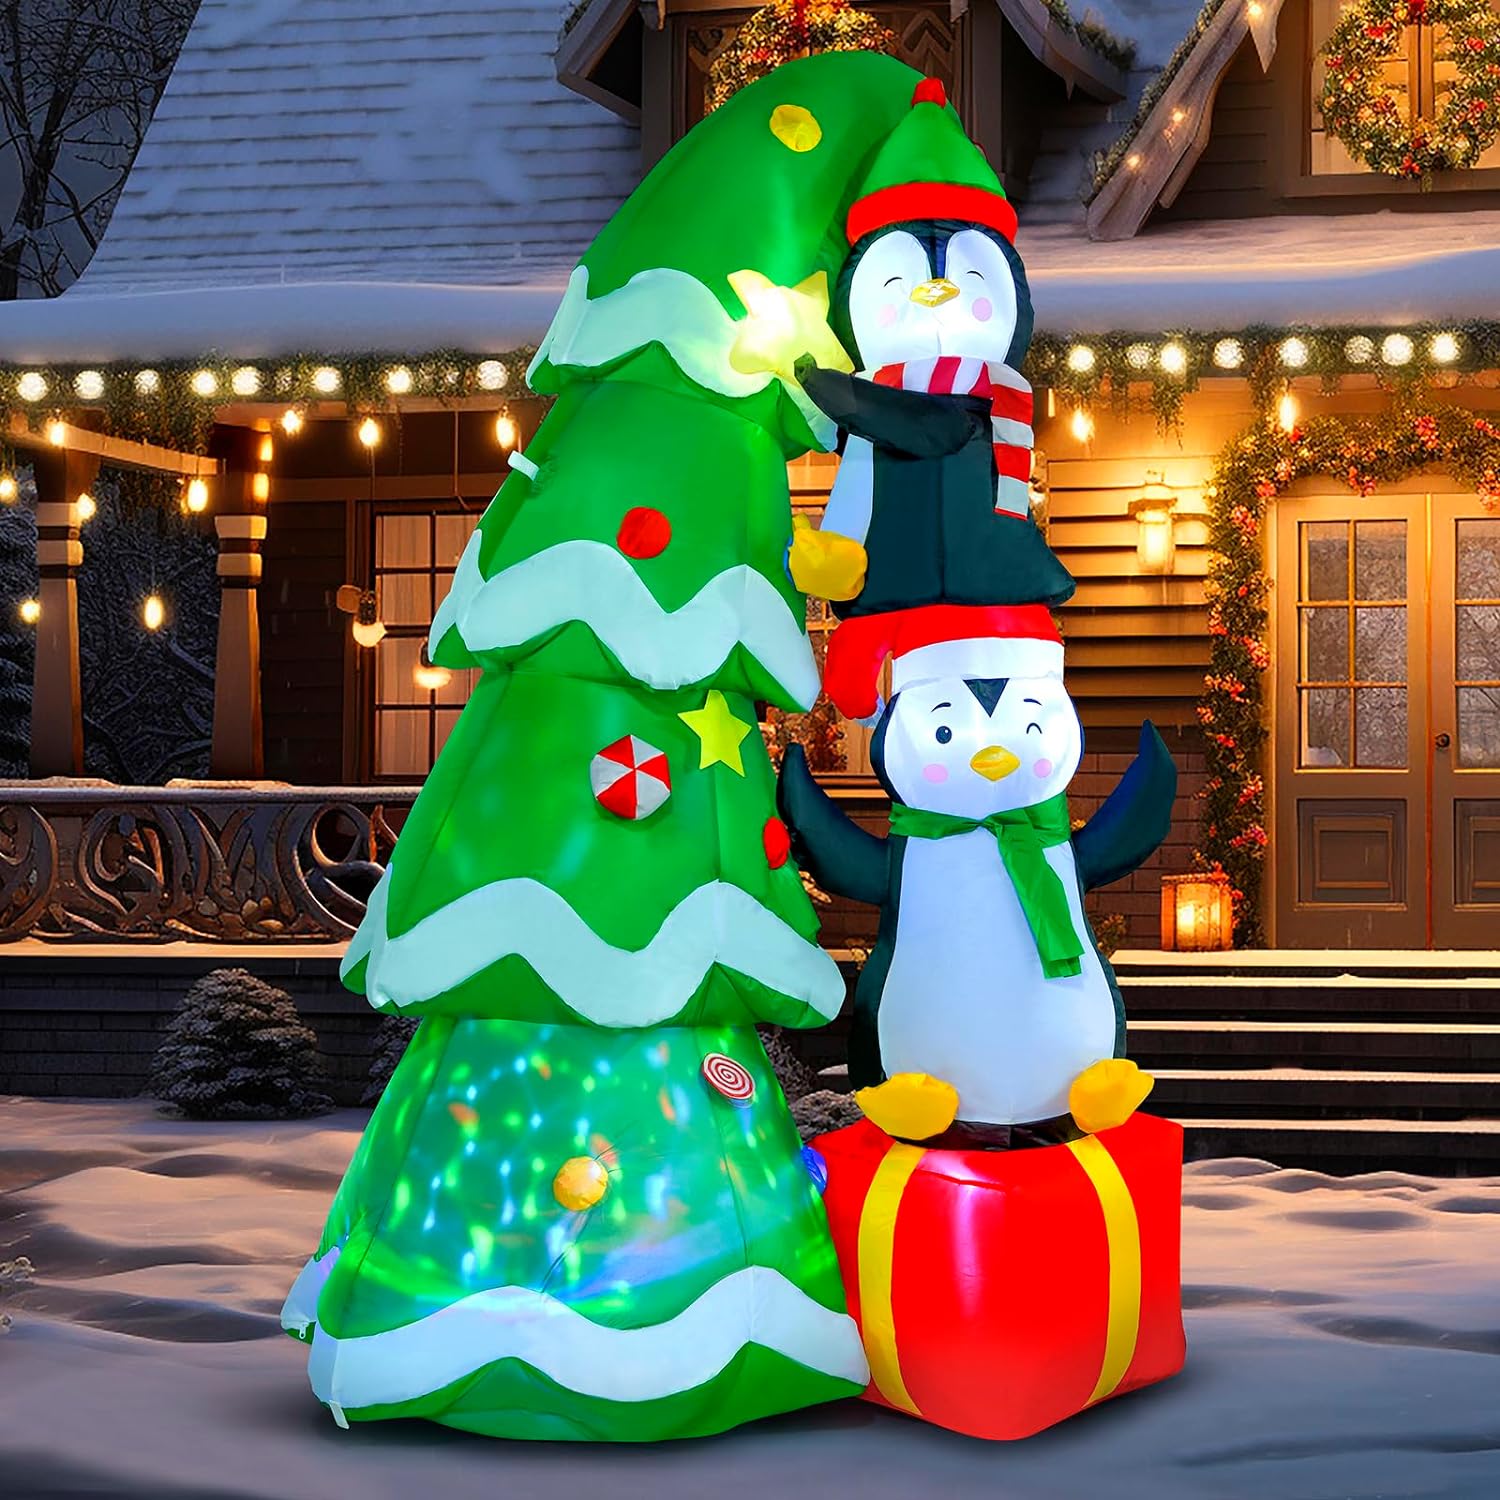 Inflatable Christmas Tree 7FT Outdoor Decorations, Blow up Christmas Tree with Penguins & Gift Box Yard Decorations, Build-in LED Lights